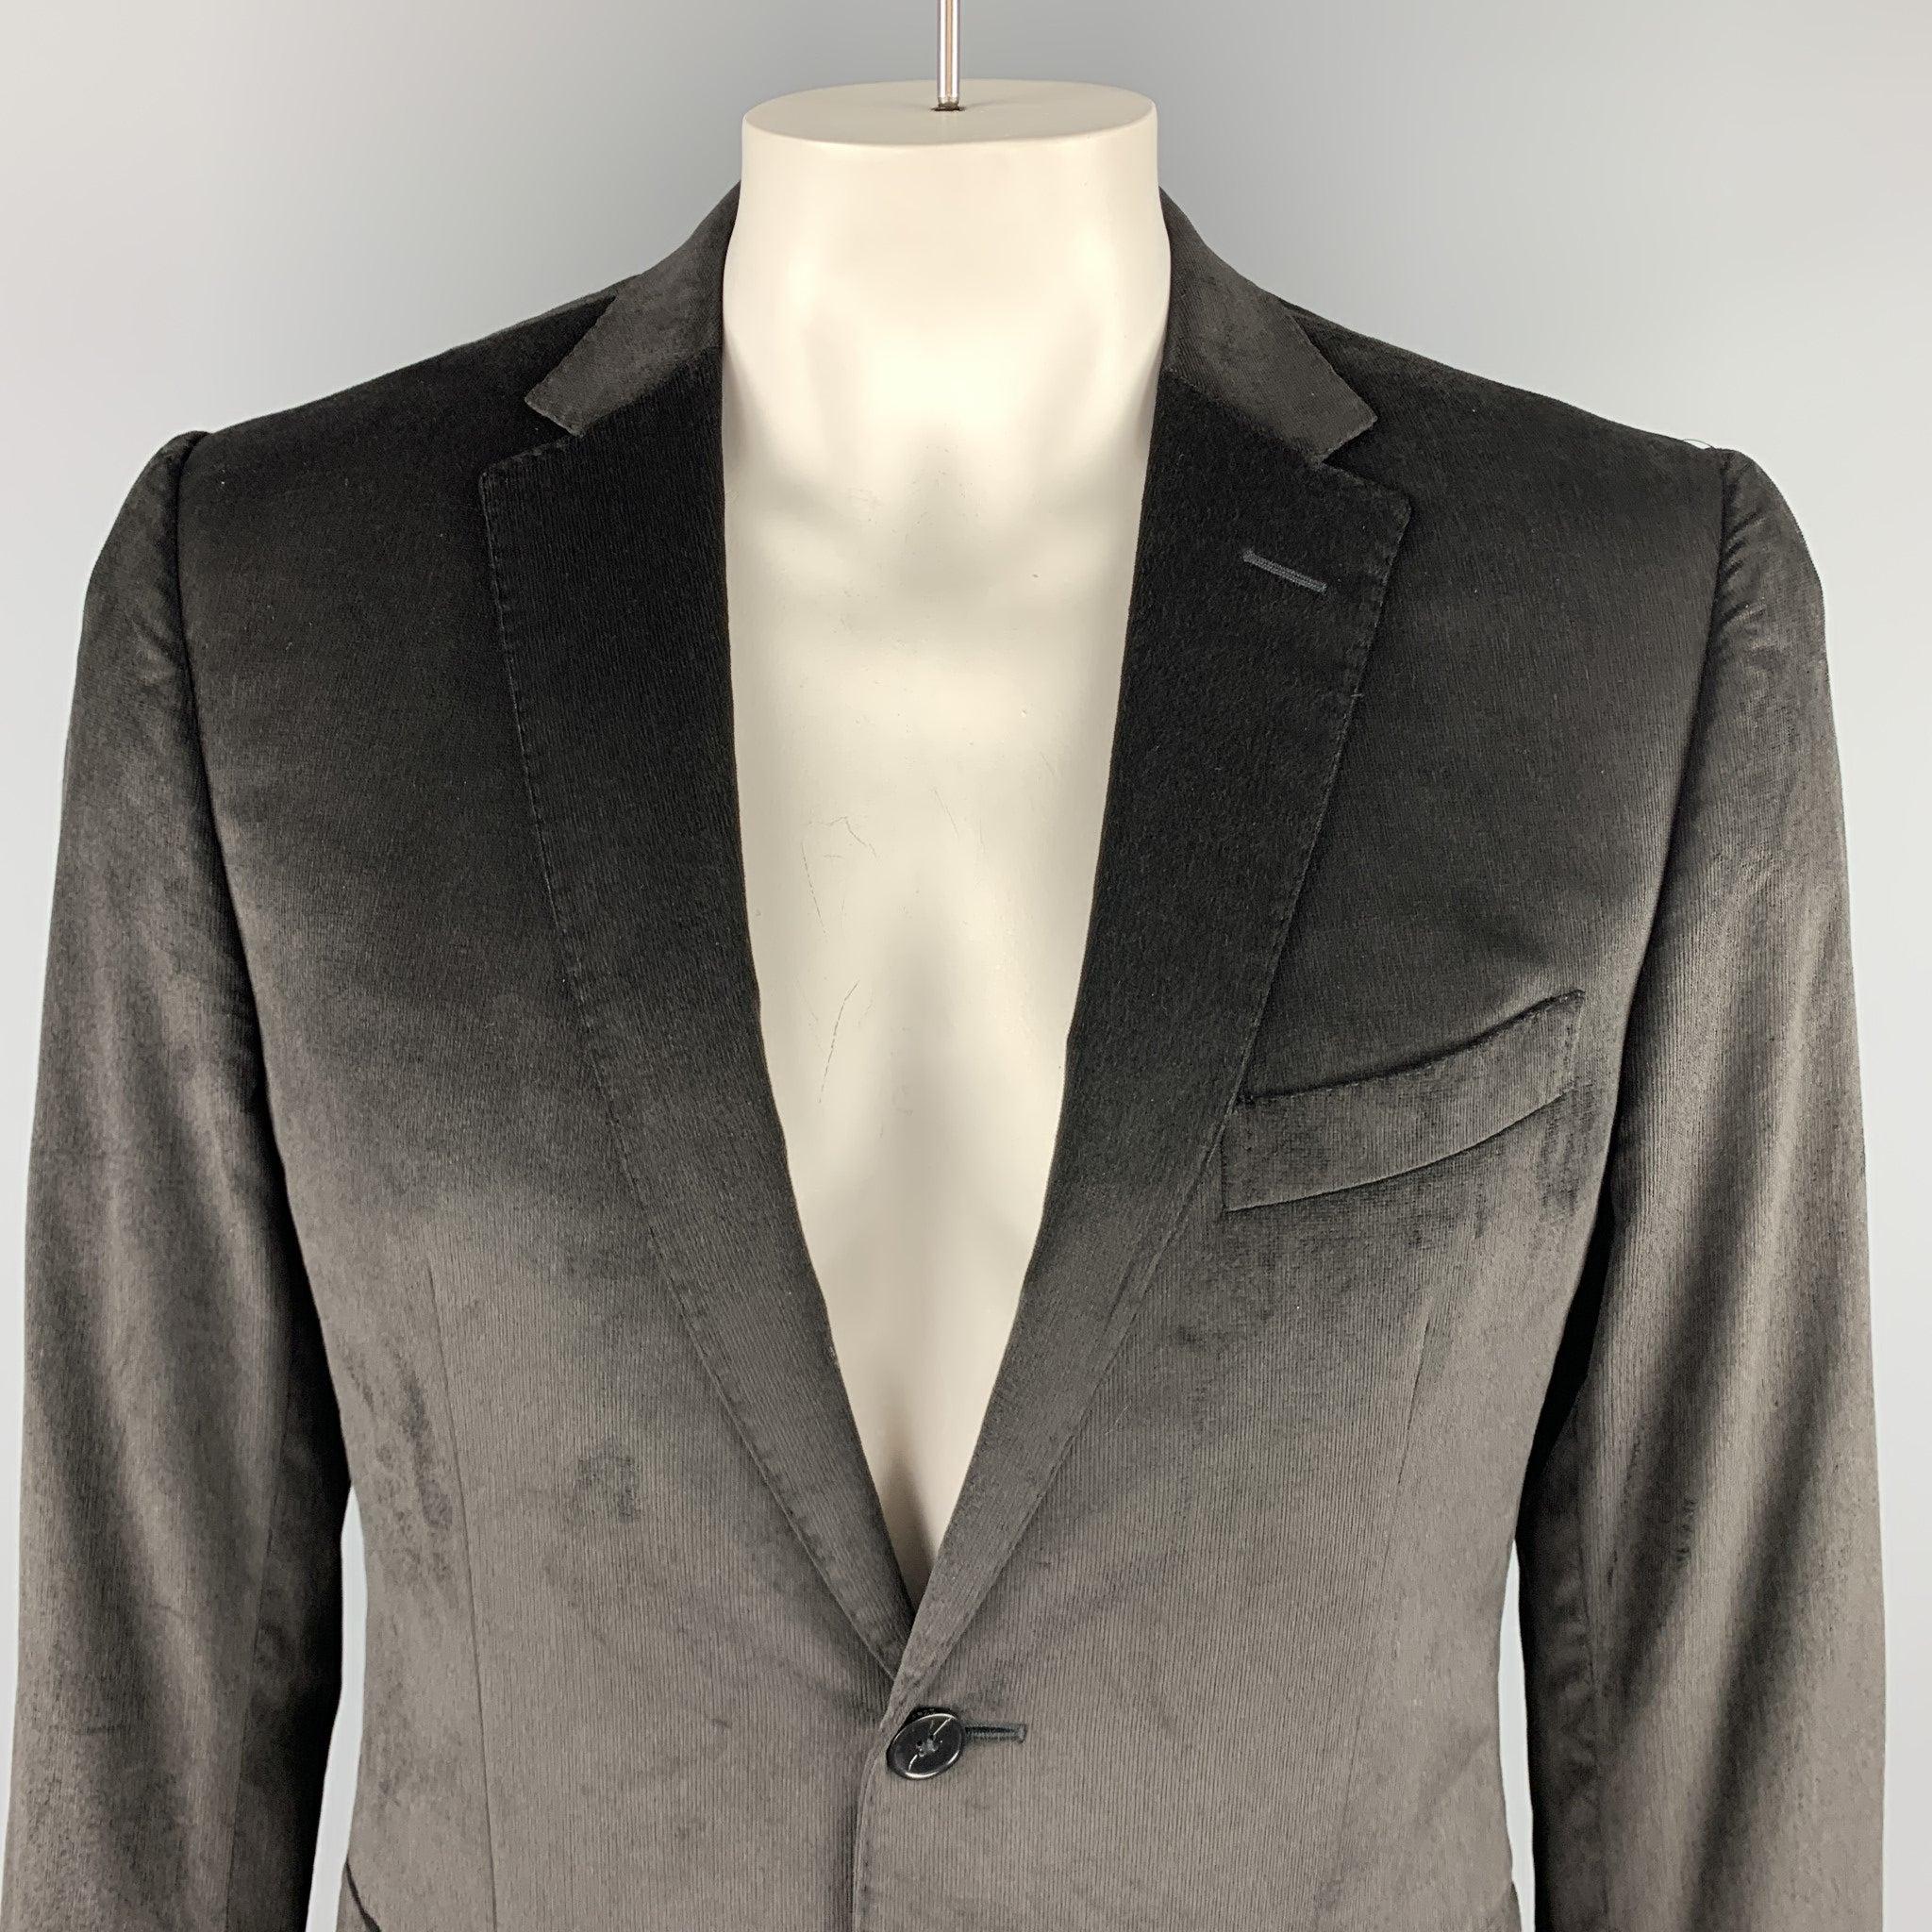 Z ZEGNA sport coat comes in black velvet with a notch lapel, single breasted, two button front, and double vented back.
Very Good Pre-Owned Condition. 

Marked:   IT 50 R 

Measurements: 
 
Shoulder: 18 inches Chest:
42 inches Sleeve: 25 inches